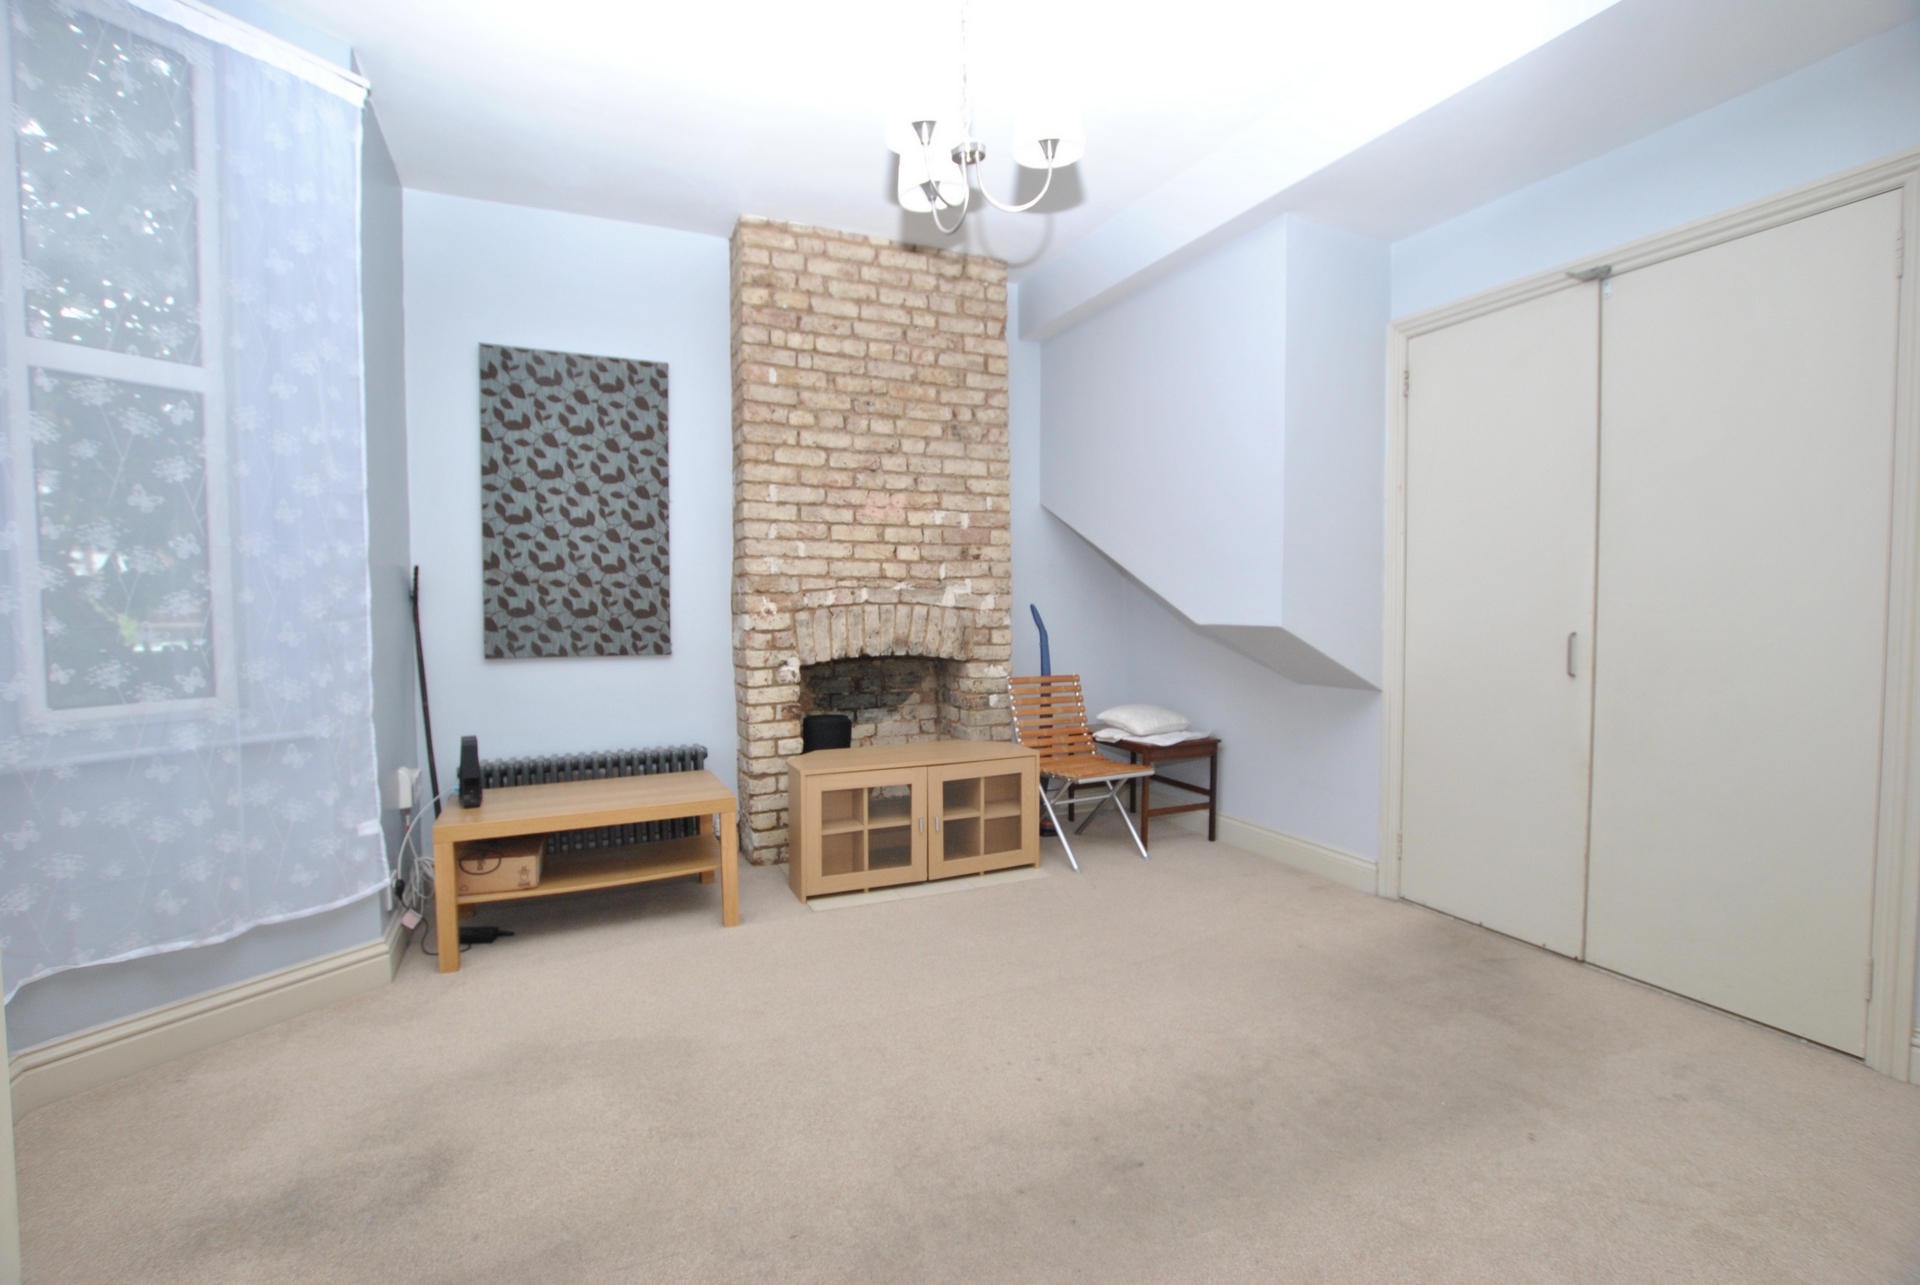 3 Bedroom House to rent in Hanwell, London, W7